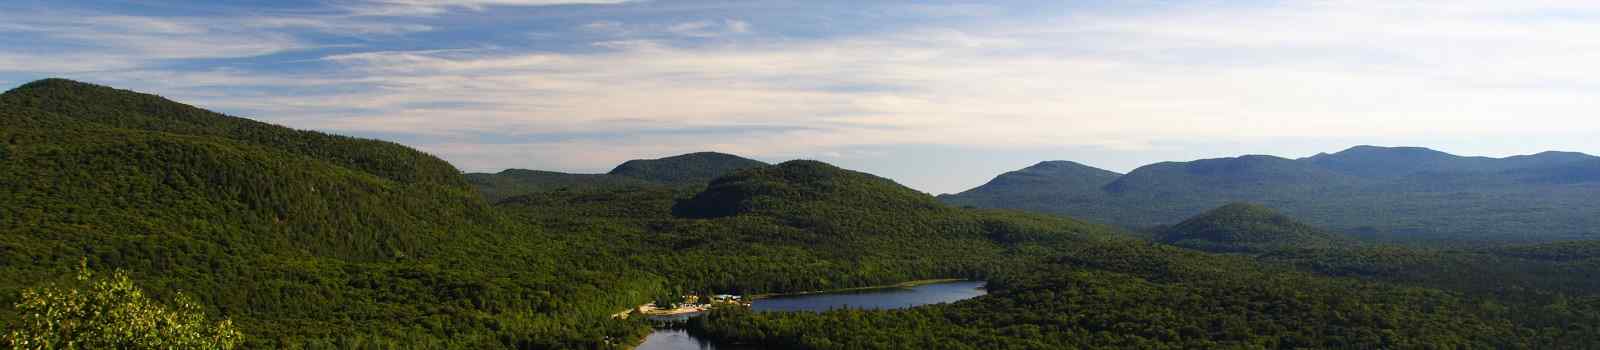 HIGHLIGHTS-ONTARIO -Kanada Lac Monroe in Mont-Tremblant national park